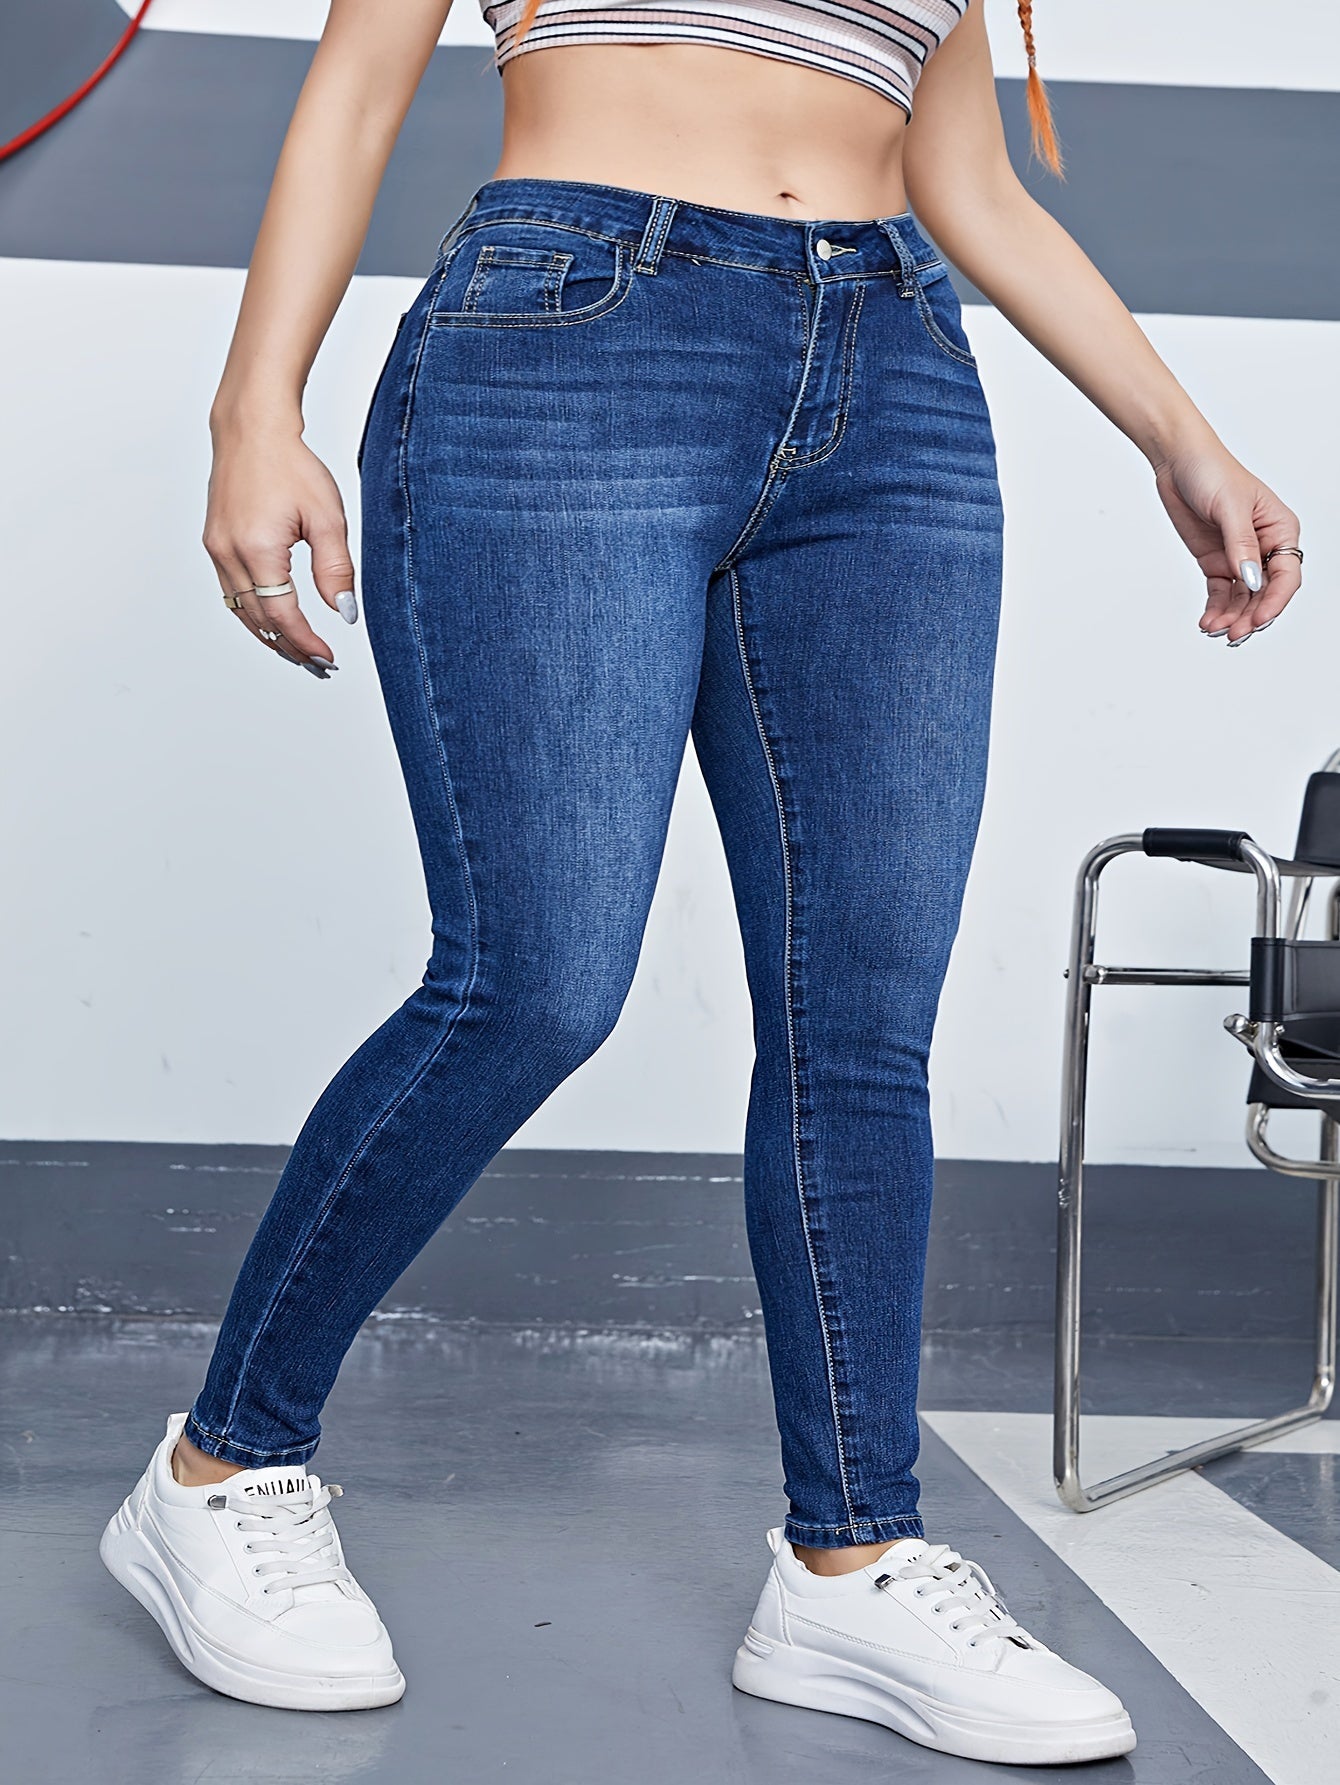 Get the Best of Both Worlds with Blue Leggings Jeans for Women - CasualFlowshop